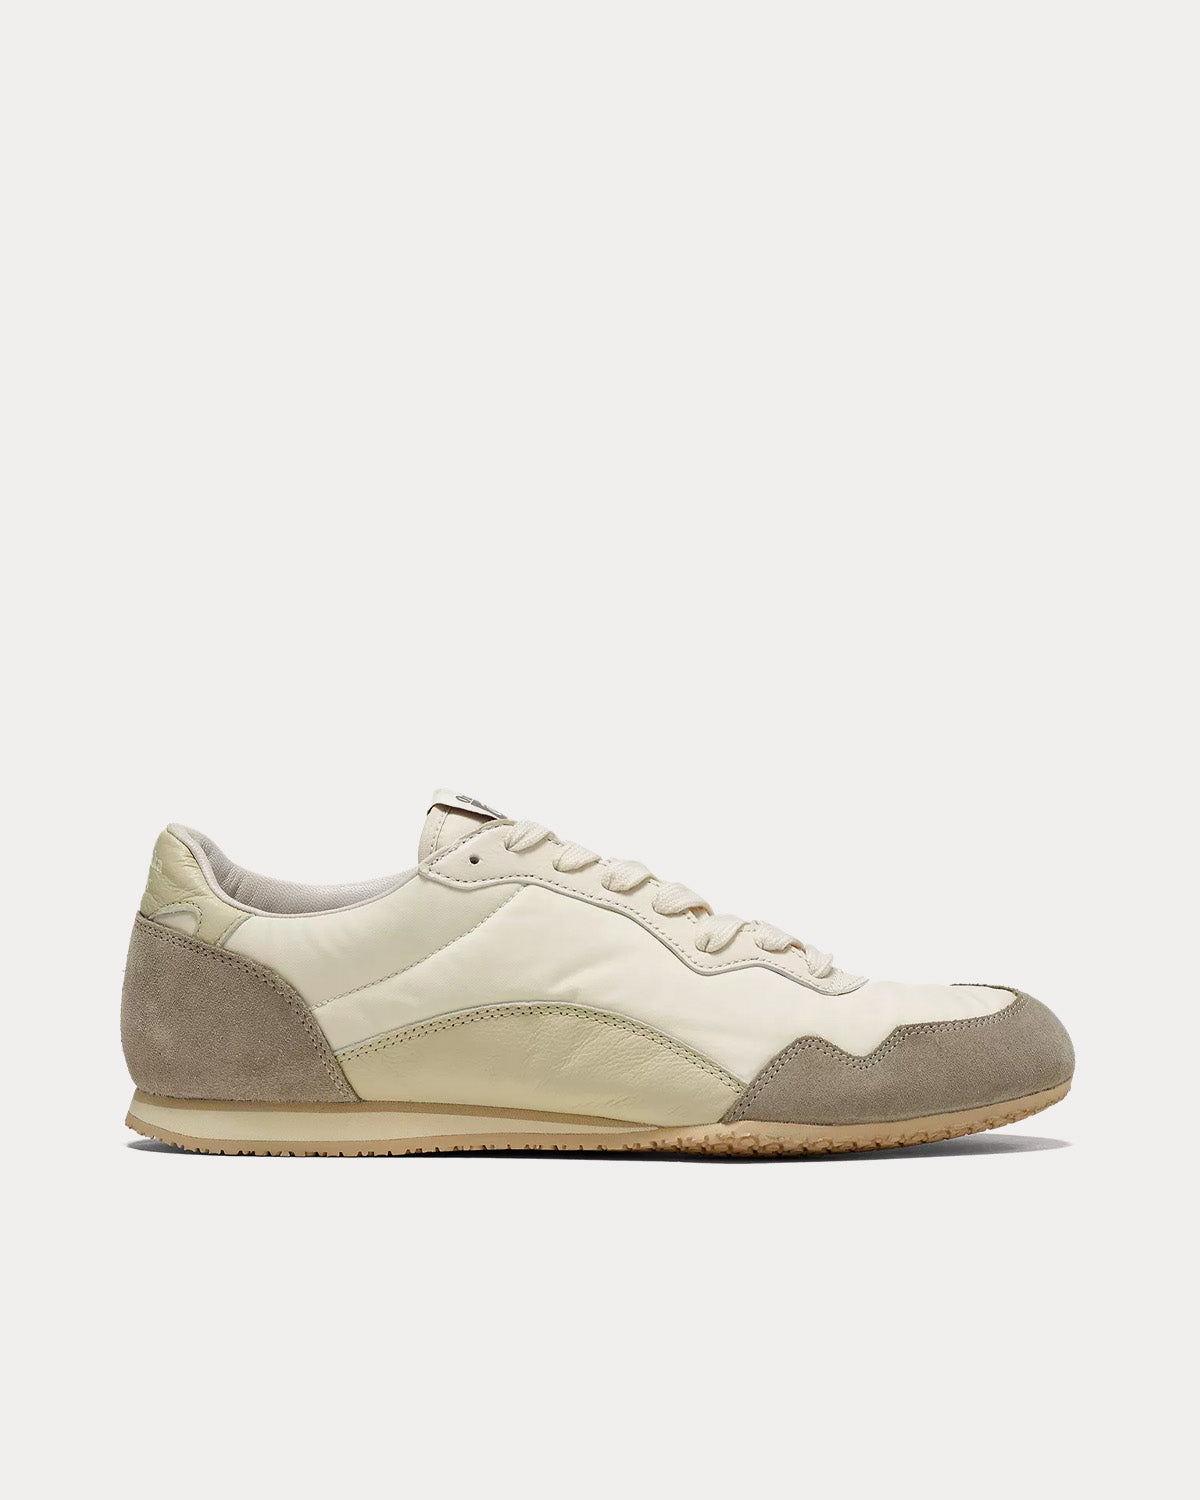 Onitsuka Tiger - Serrano CL Cream / Putty Low Top Sneakers